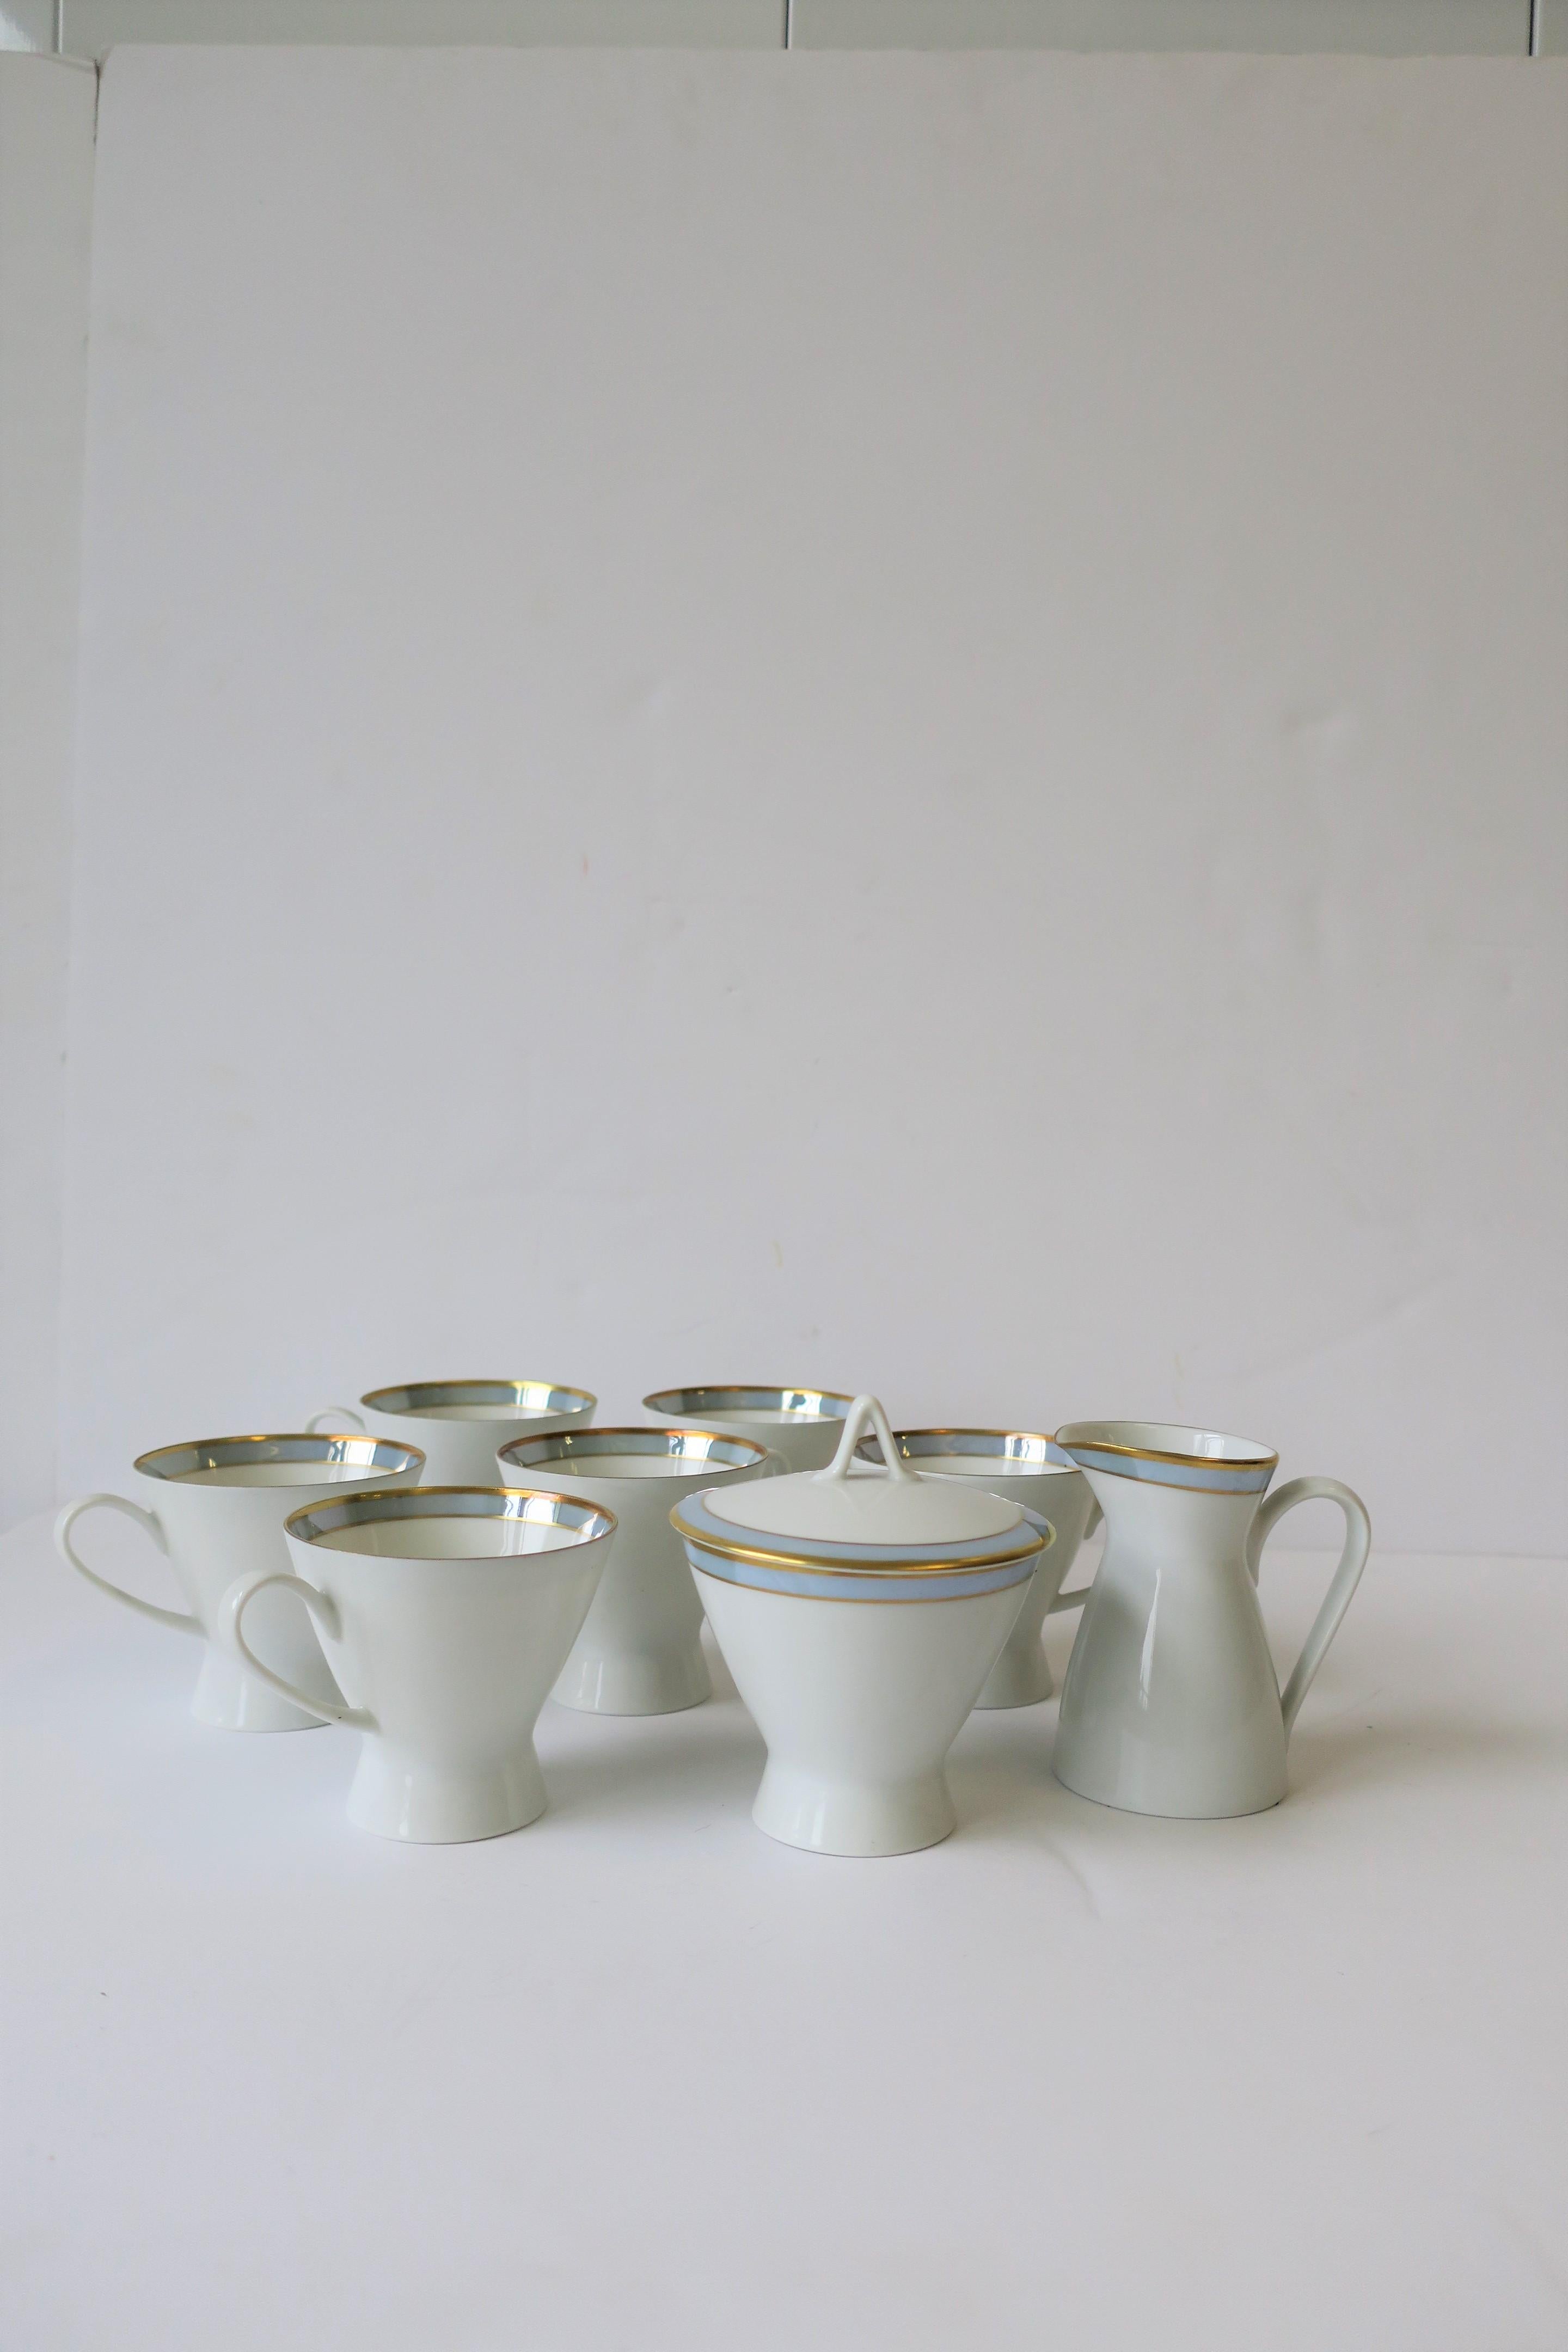 Midcentury Modern German Blue & White Porcelain Coffee or Tea Set by Rosenthal   For Sale 3